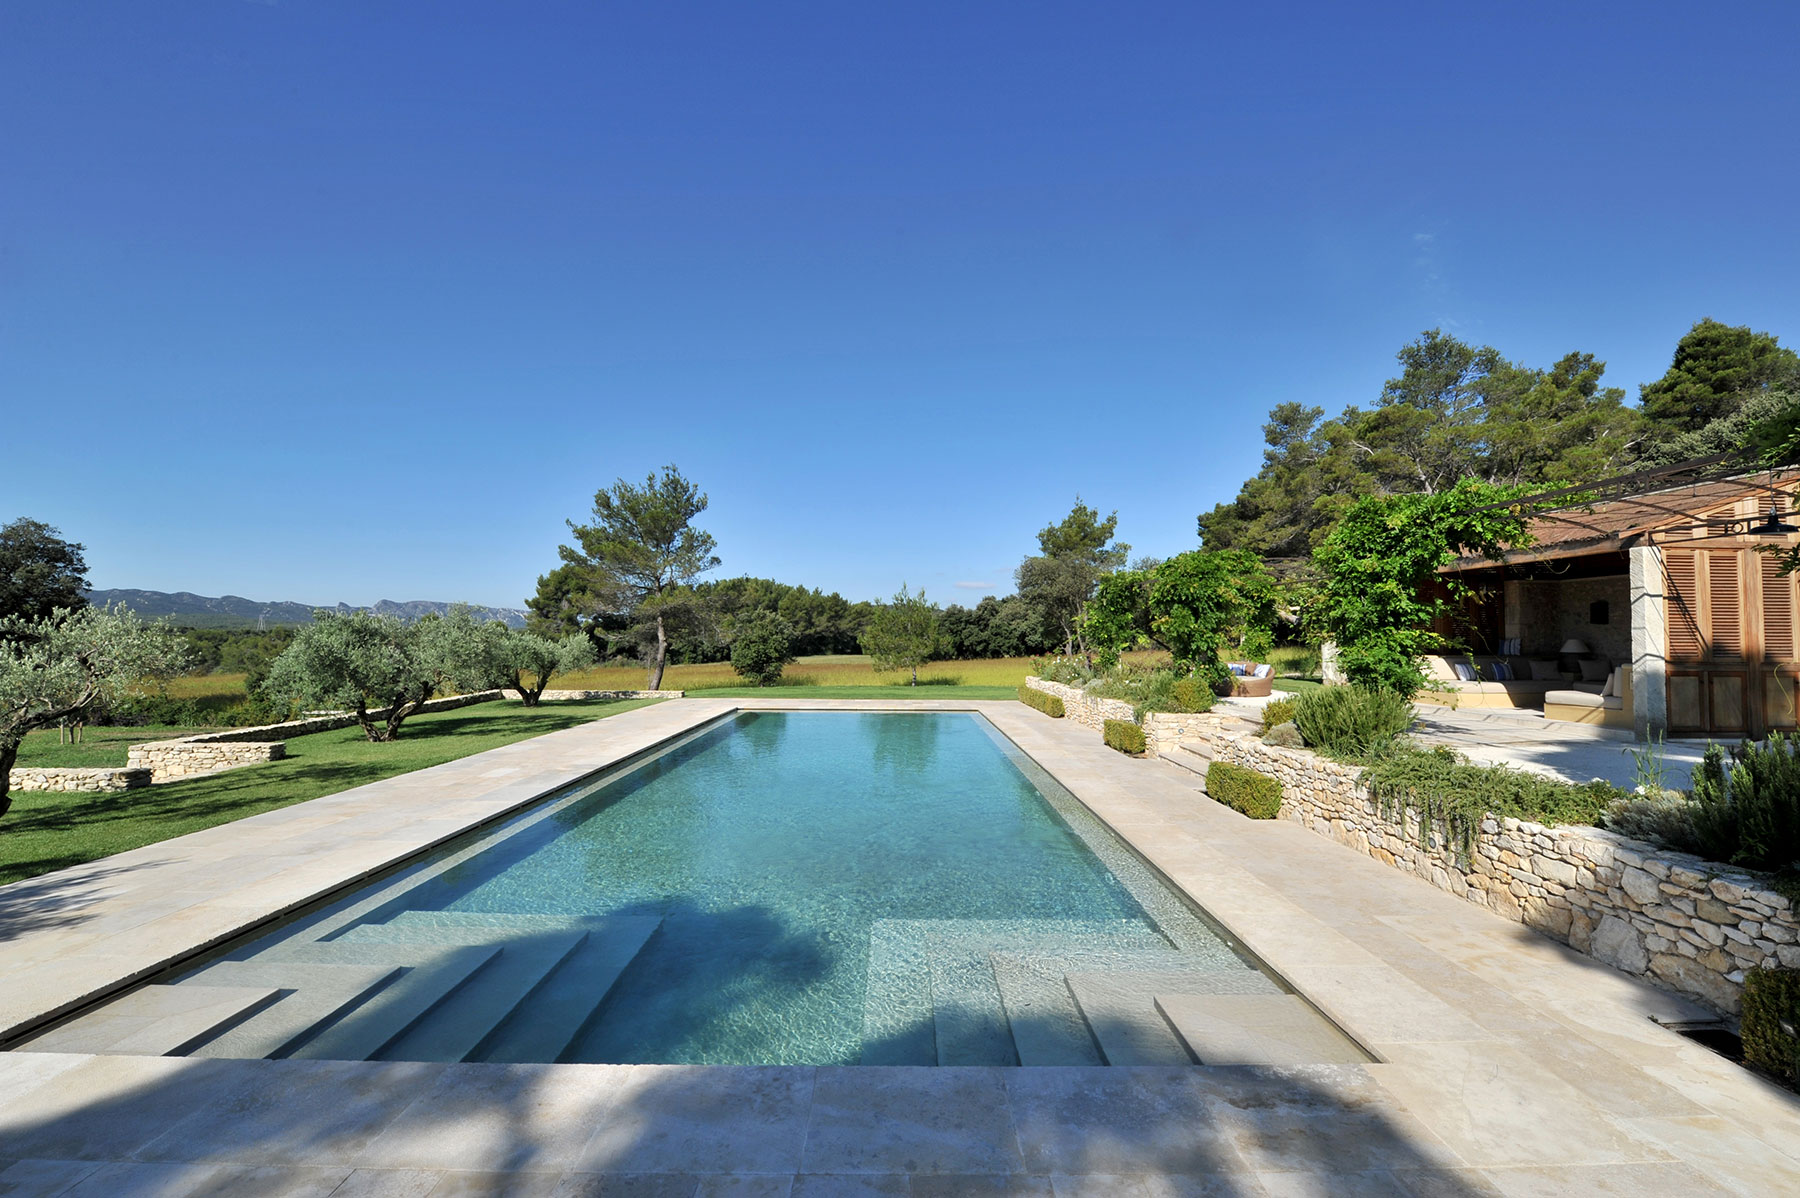 10   The pool surround is in Perigord stone